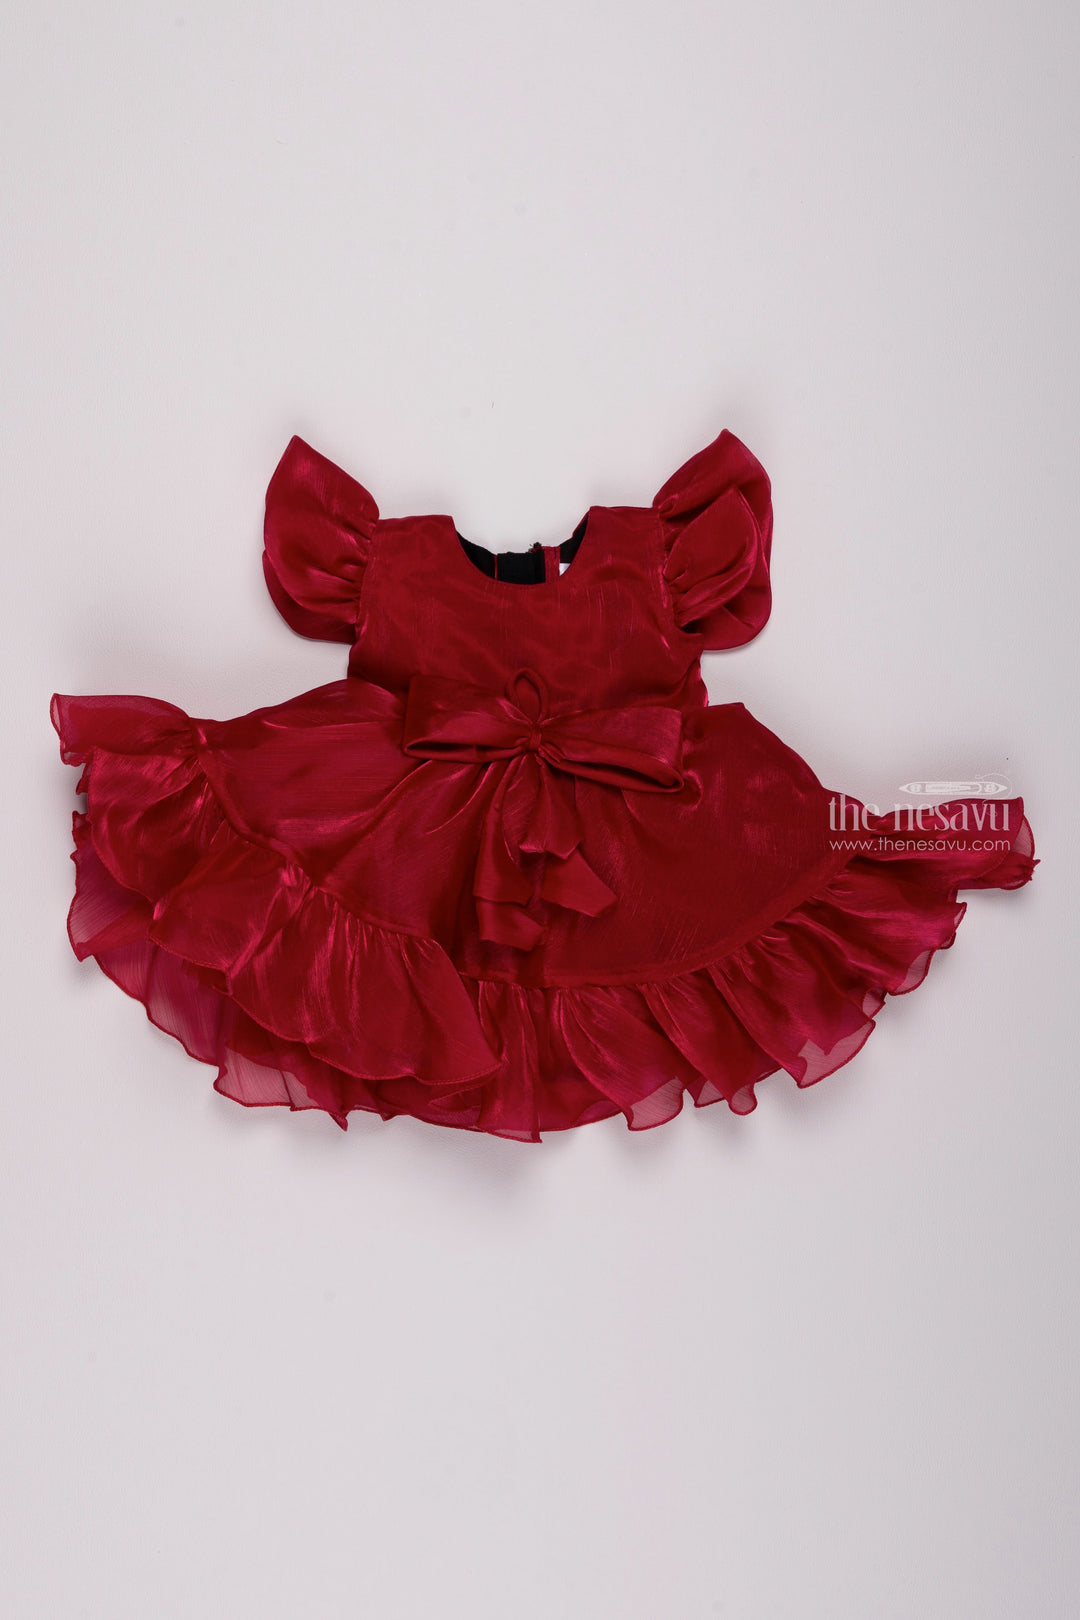 The Nesavu Girls Fancy Party Frock Crimson Charm: Flared Organza Party Frock with Distinctive Bow Detail Nesavu 12 (3M) / Red / Organza PF138B-12 Chic Baby Girl Organza Dress | Trendy Party Frocks for Little Ones | The Nesavu